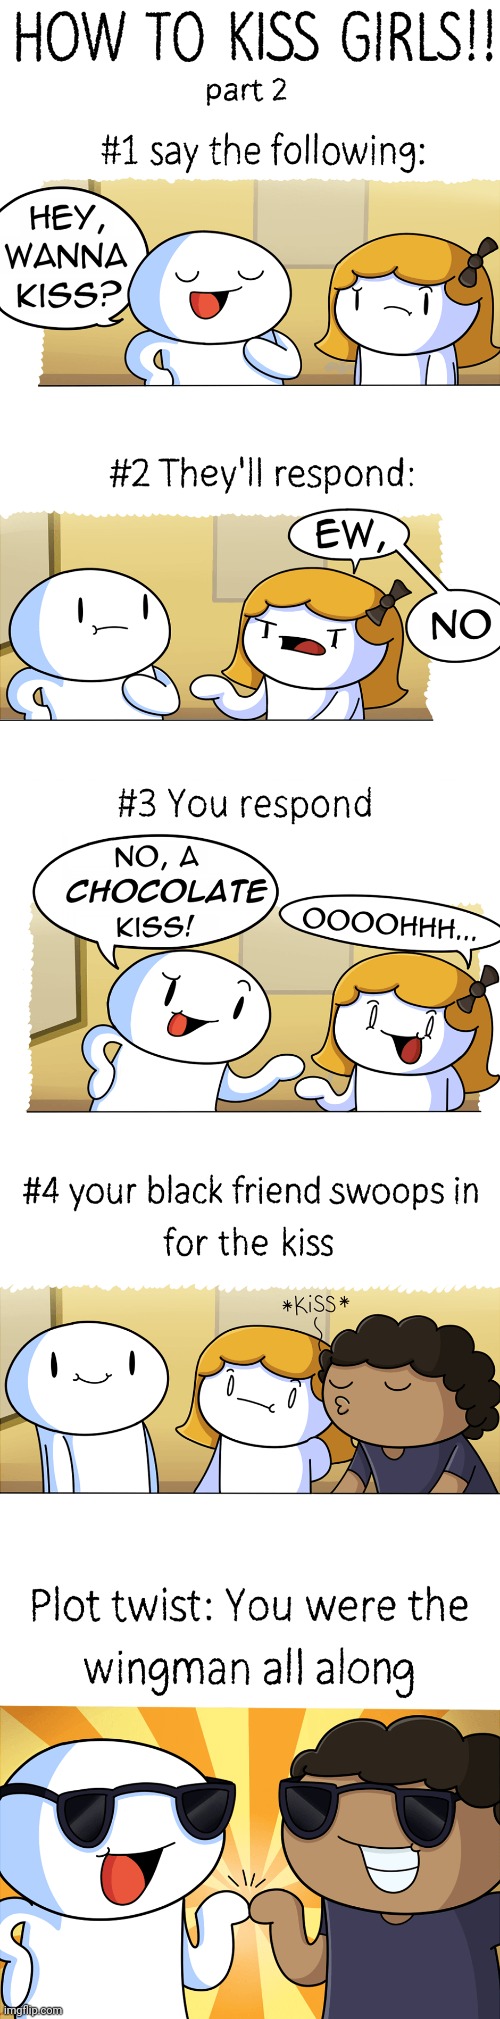 How to kiss girls, part 2!!! | image tagged in theodd1sout,comics,comics/cartoons,comic,love,relationship | made w/ Imgflip meme maker